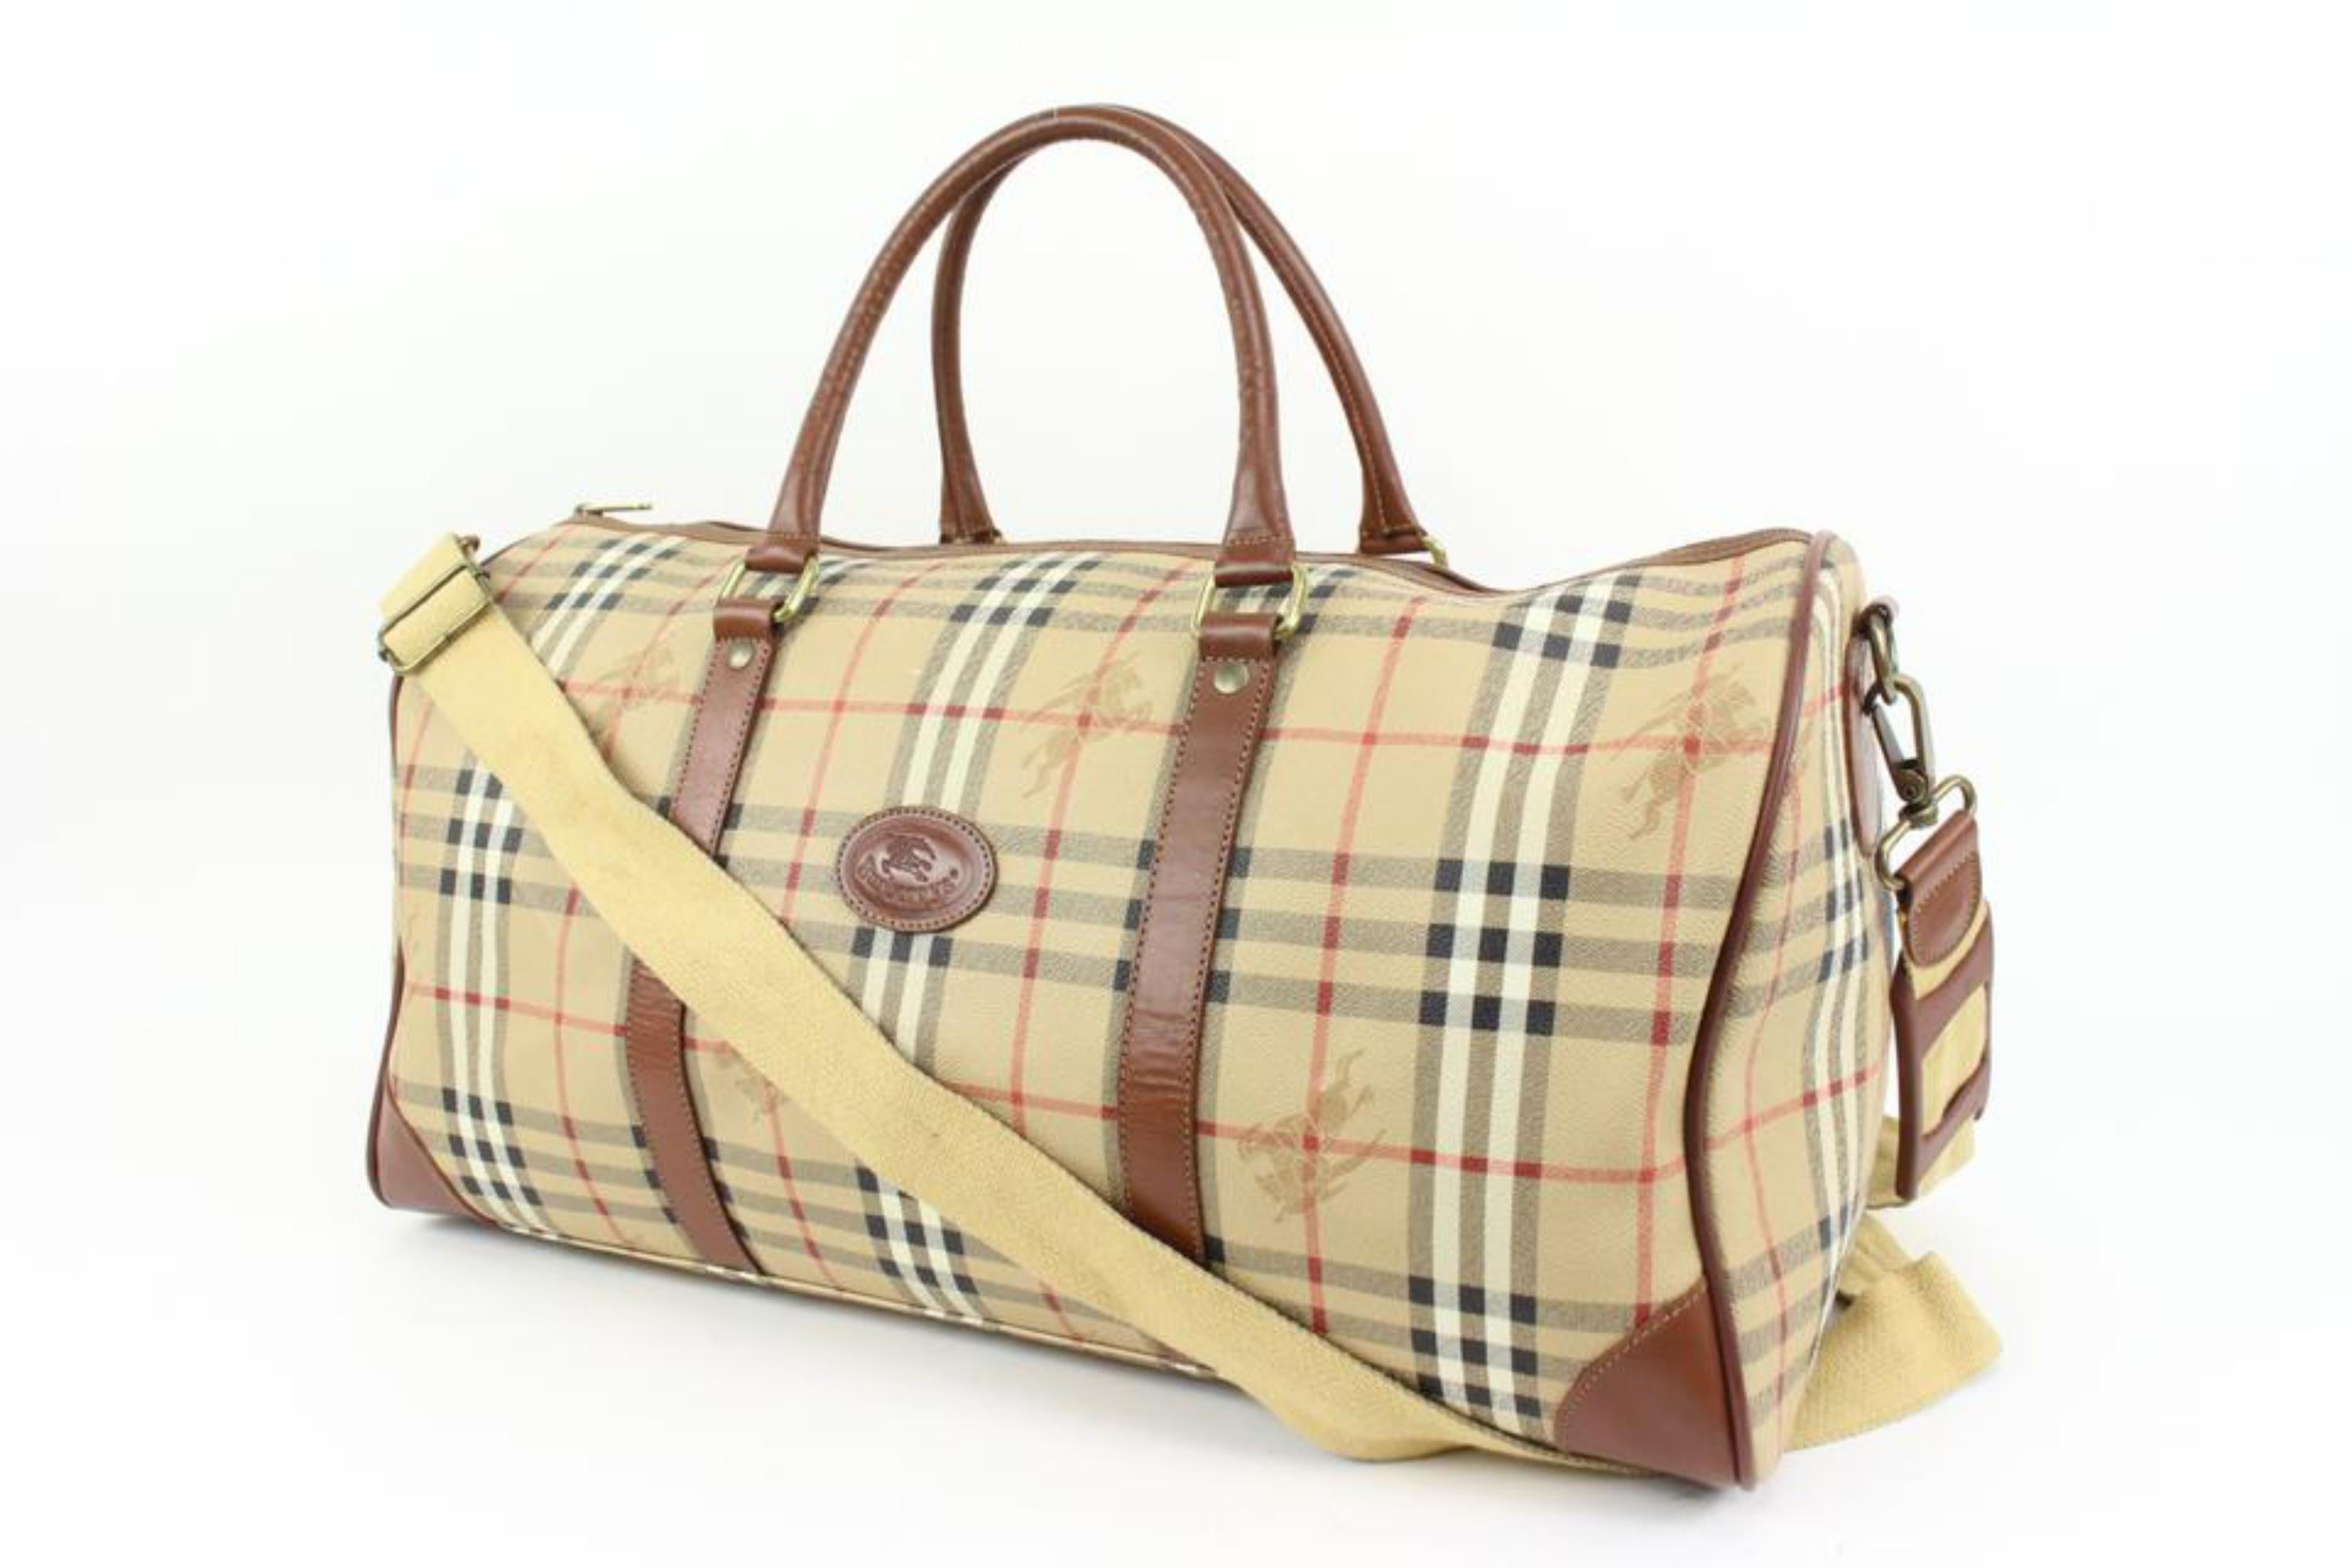 Burberry Beige Nova Check Boston Duffle Bag with Strap 42b324s
Made In: Italy
Measurements: Length:  20